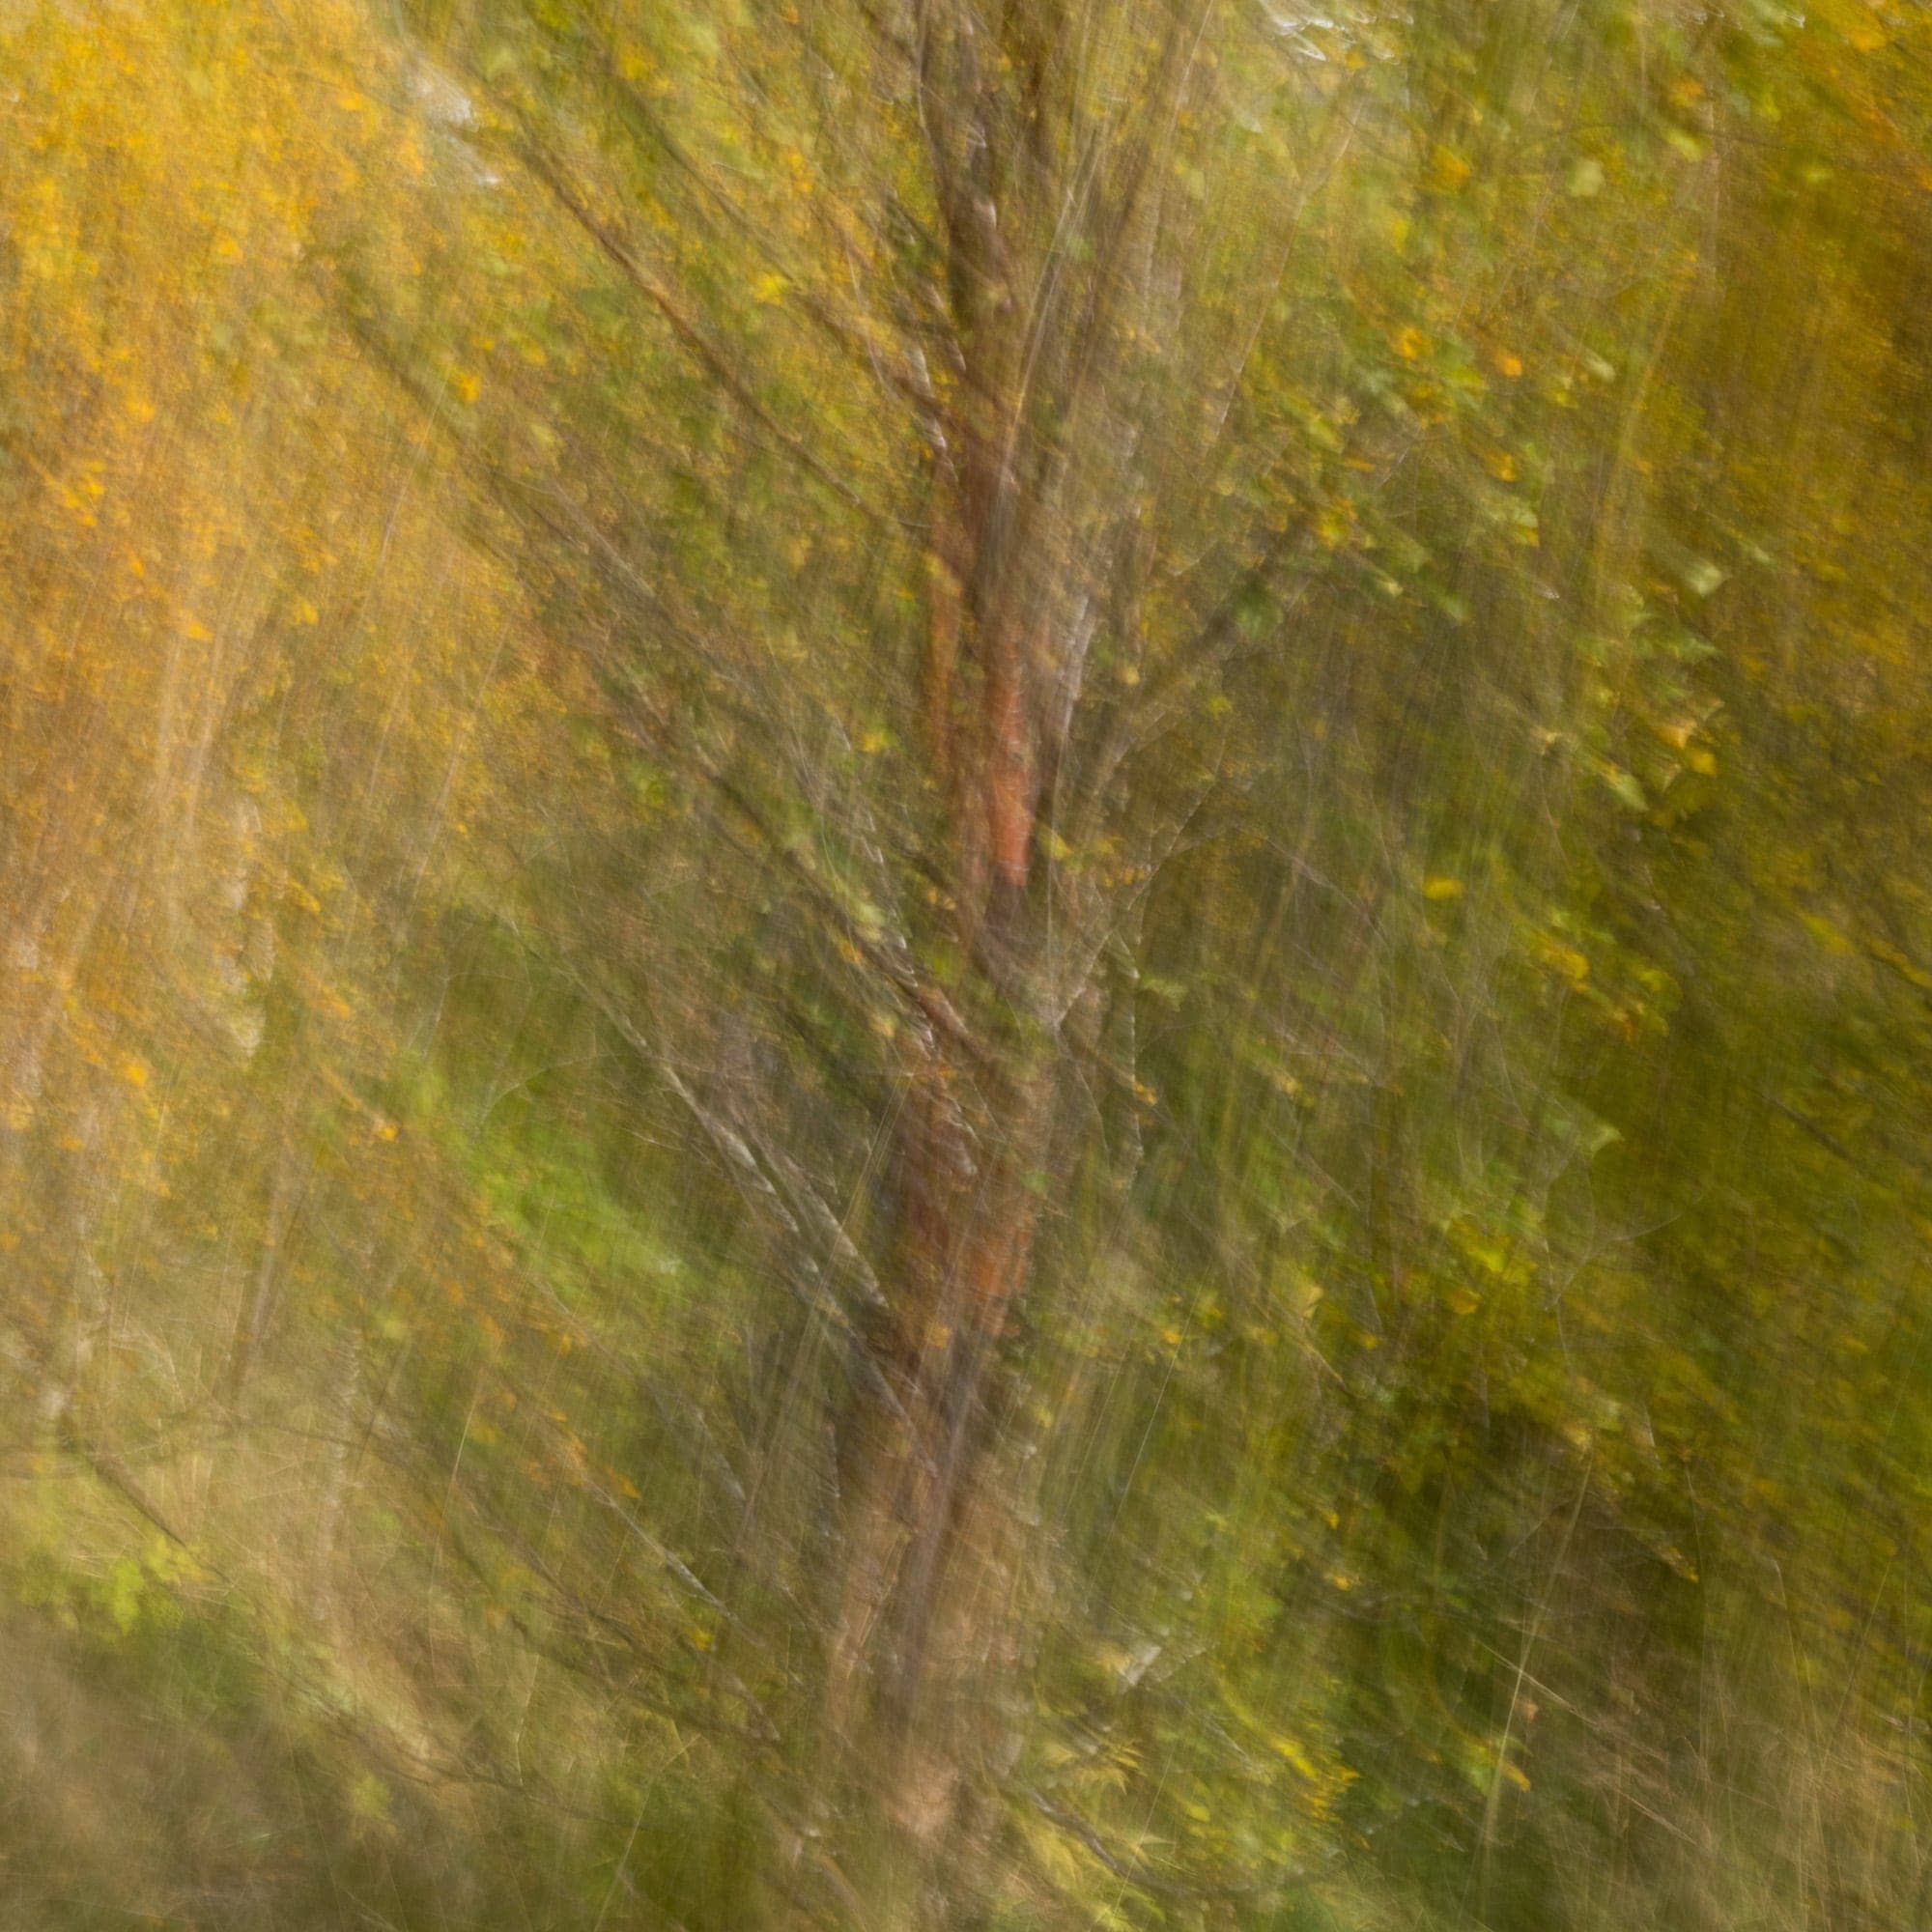 Abstract, motion-blurred image of autumnal trees in the Snæfellsnes Peninsula, creating a painterly effect in warm hues.